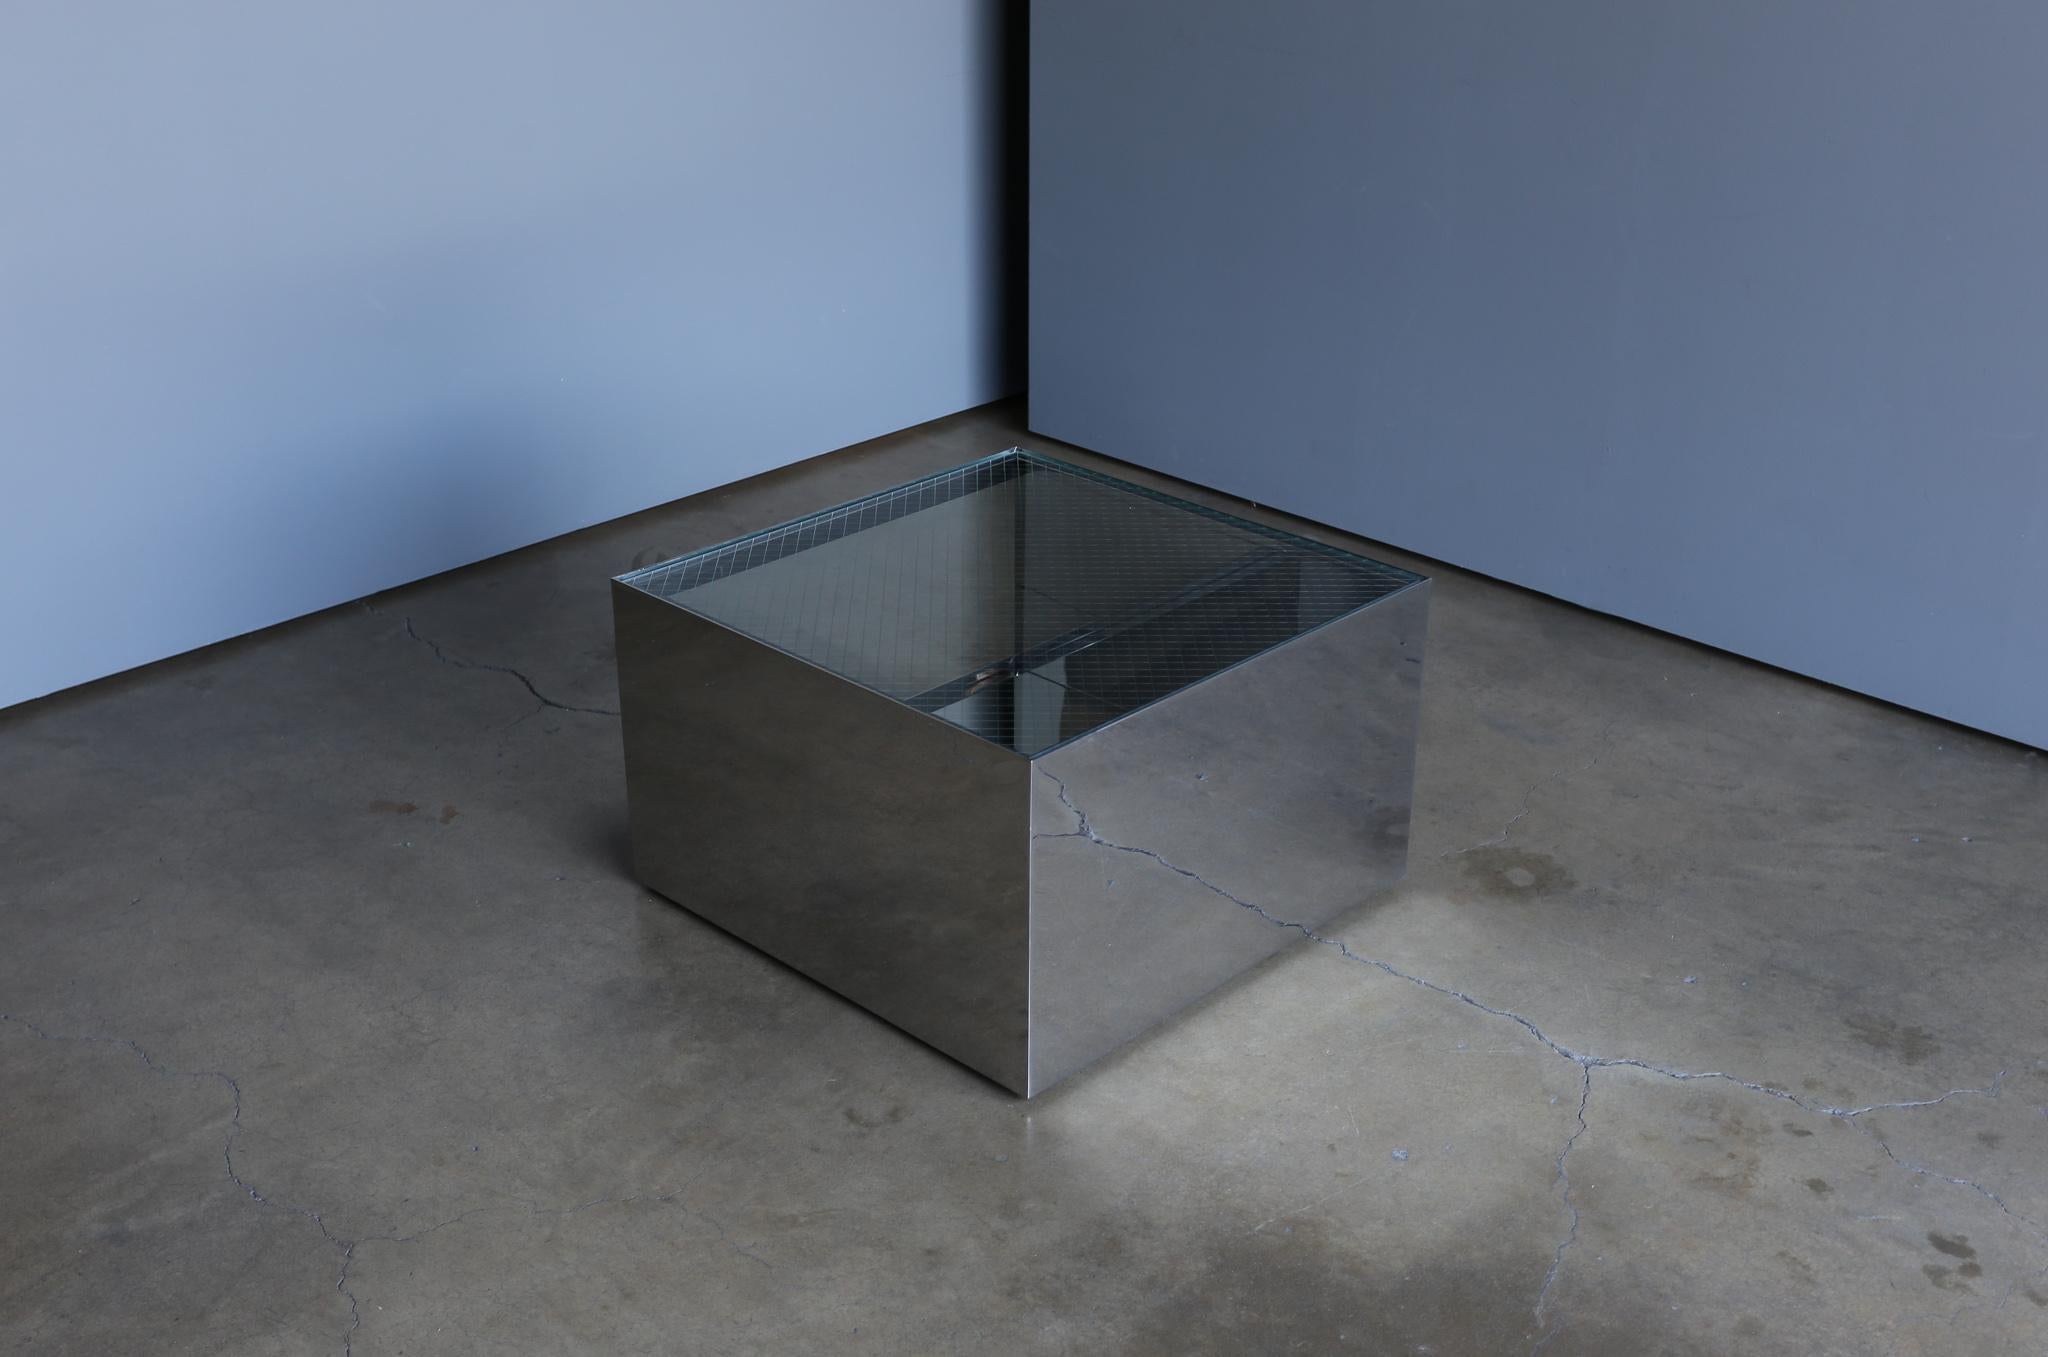 20th Century Joe D'urso Polished Stainless Steel Table for Knoll, circa 1981